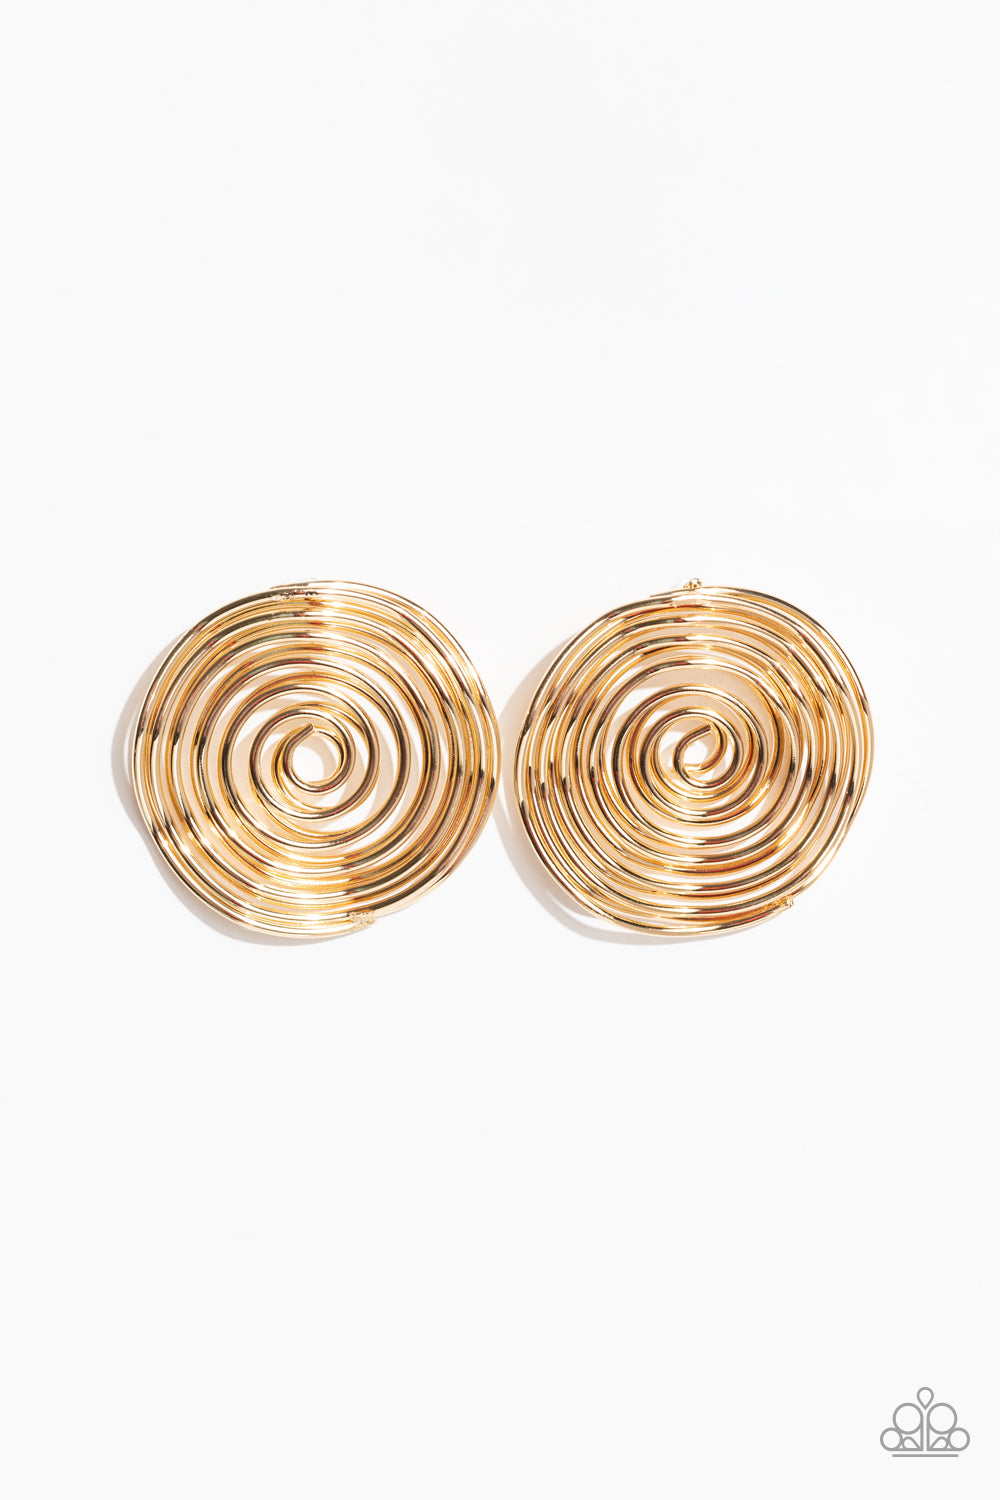 COIL Over - Gold (Post) Earring